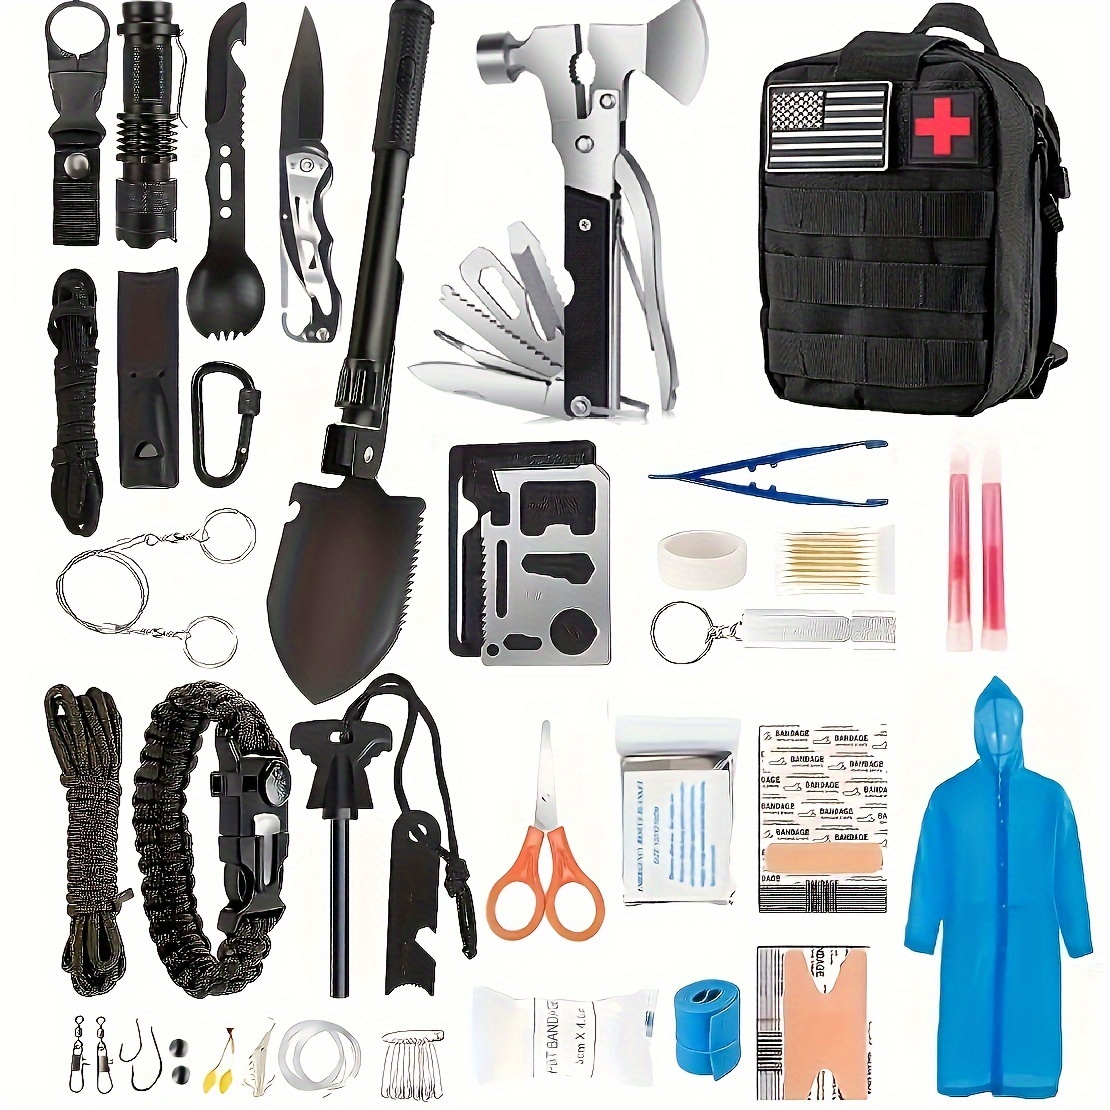 Survival Emergency Kit Professional Survival Gear Tool First Aid Supplies  For Camping 